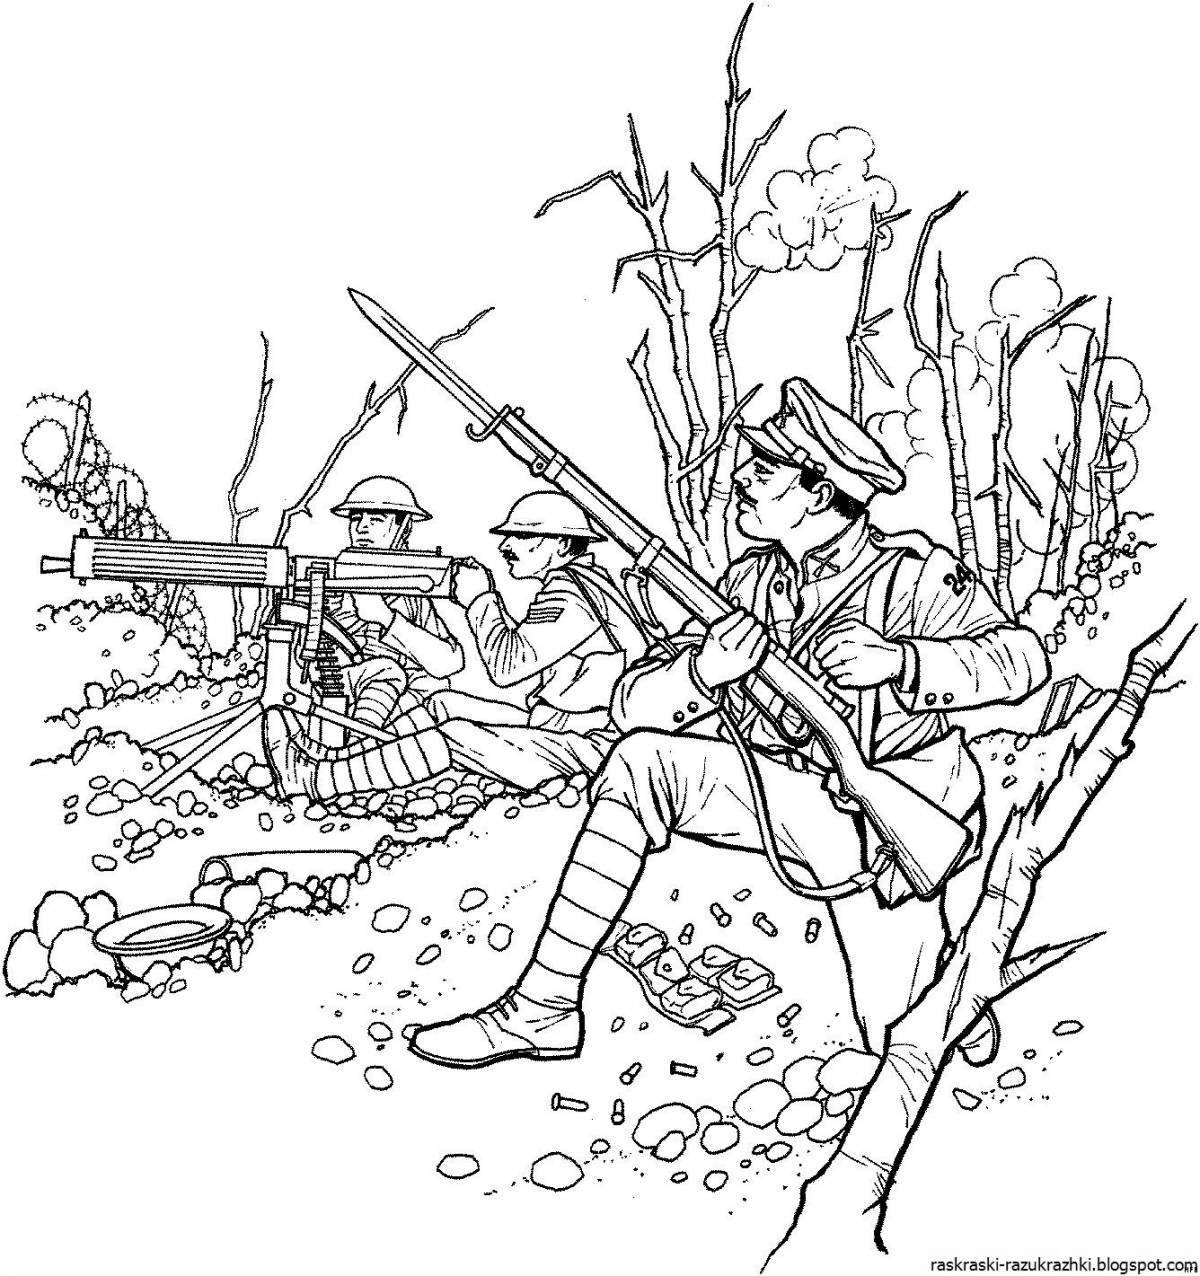 Heroic war heroes coloring pages for kids